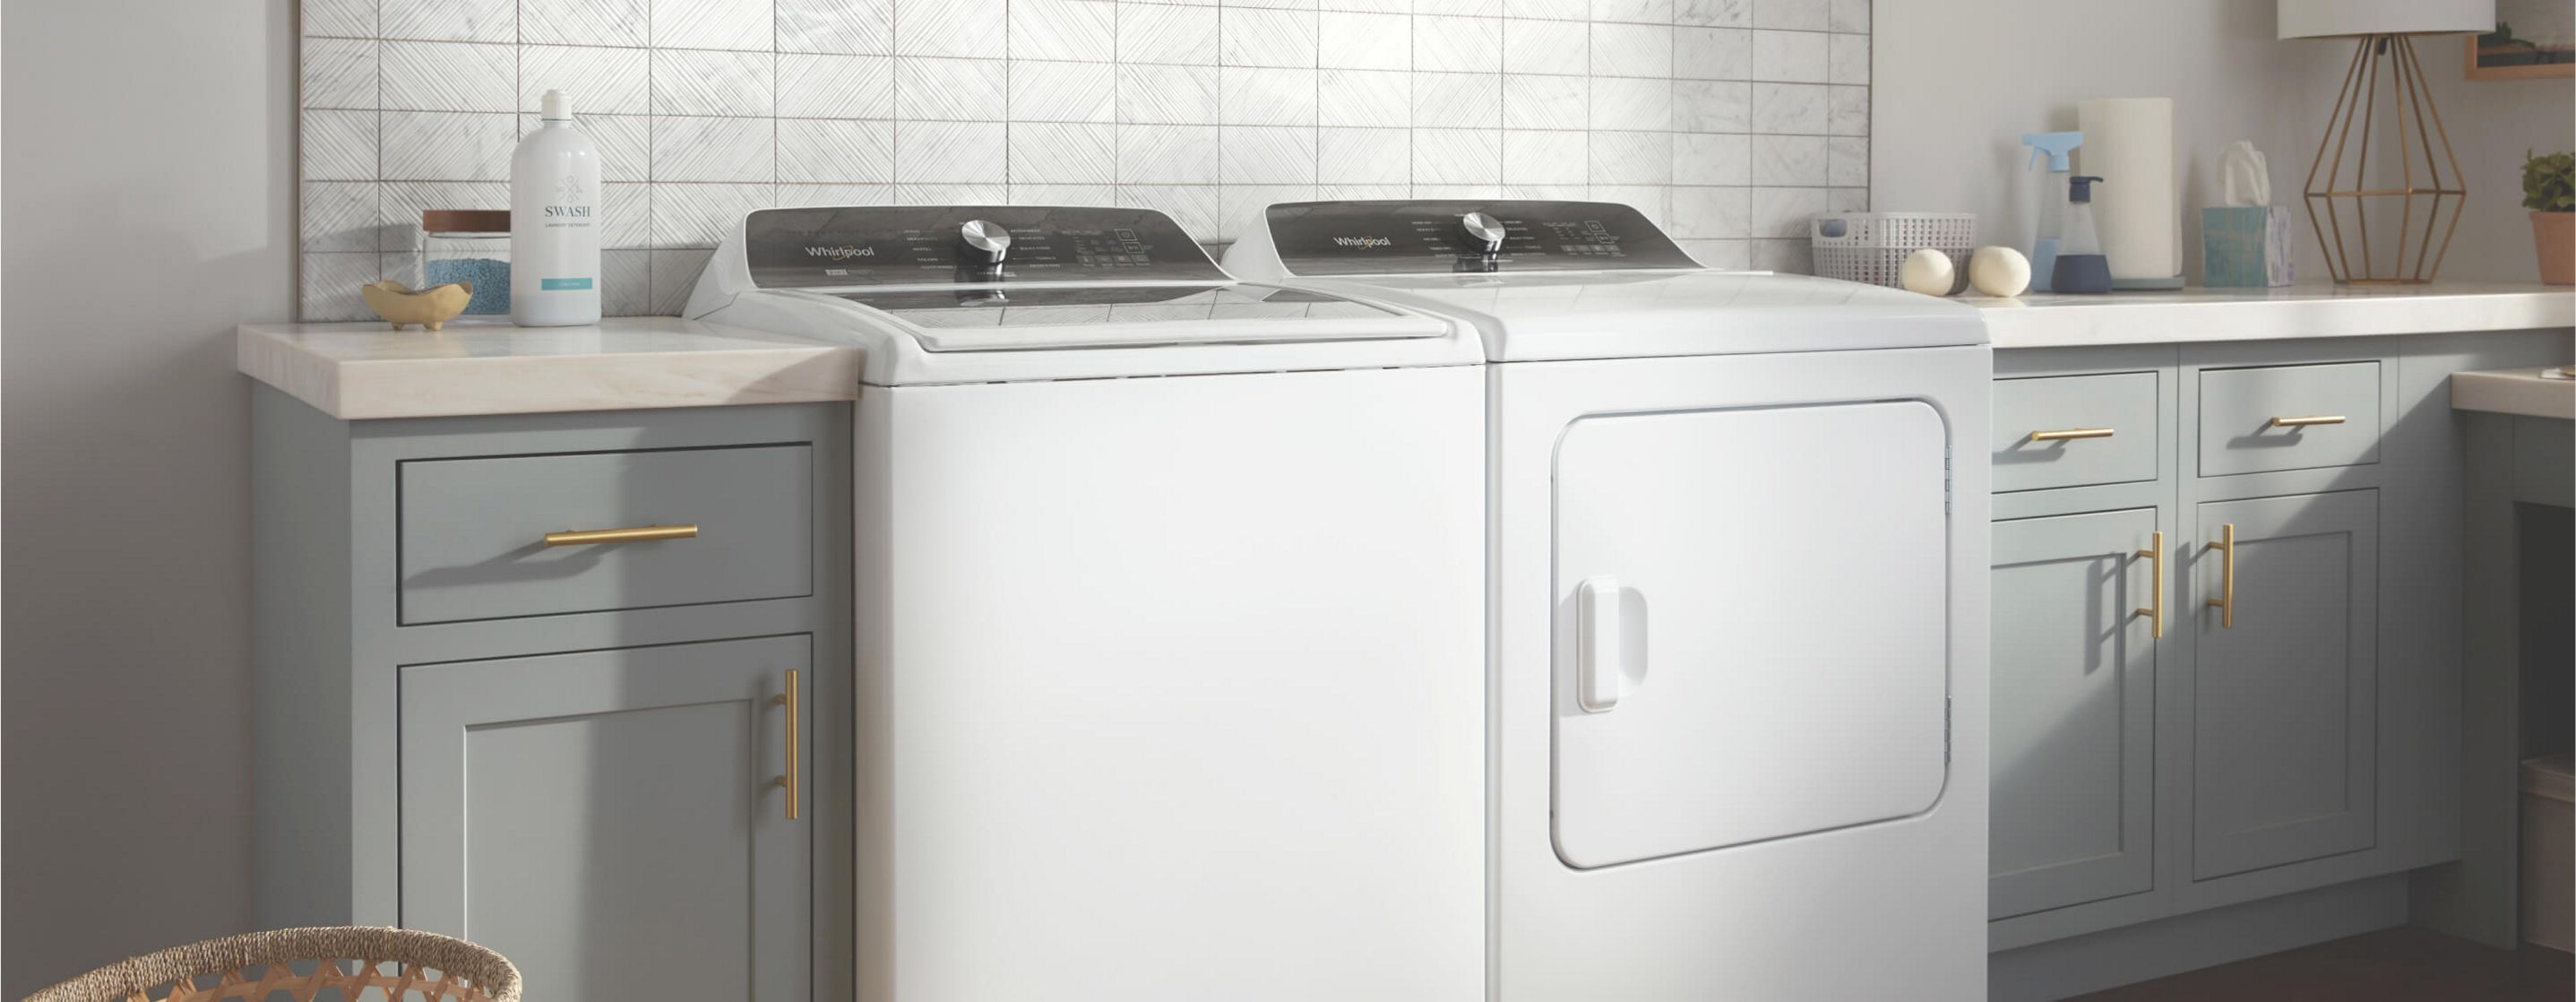 A white top load washer and dryer set in a laundry room